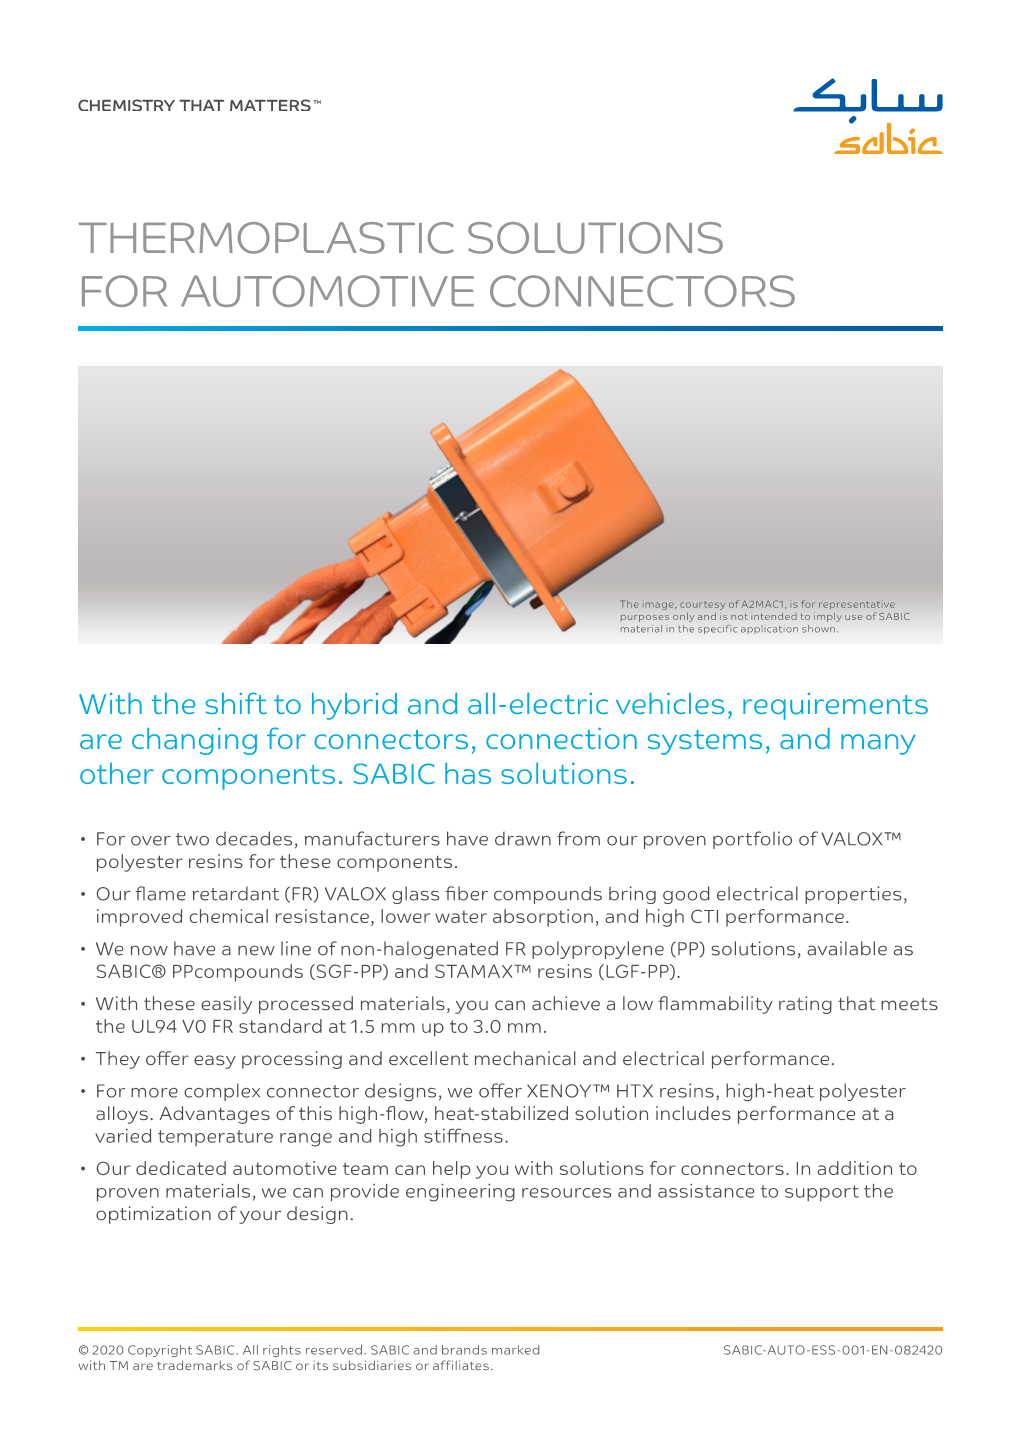 Thermoplastic Solutions for Automotive Connectors